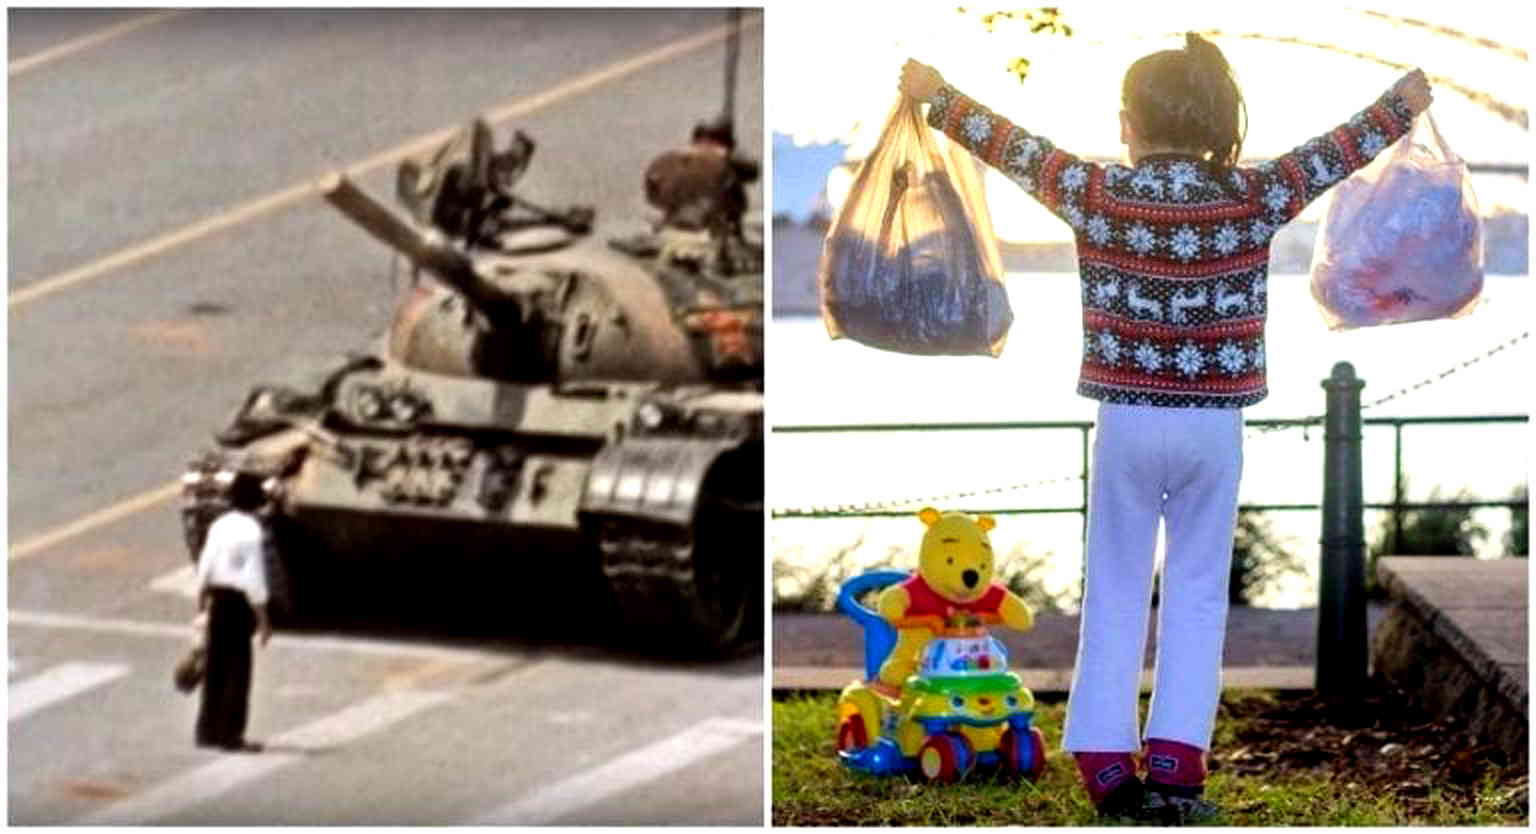 The Internet Reenacted the ‘Tank Man’ Photo in Honor of the Tiananmen Square Massacre Anniversary